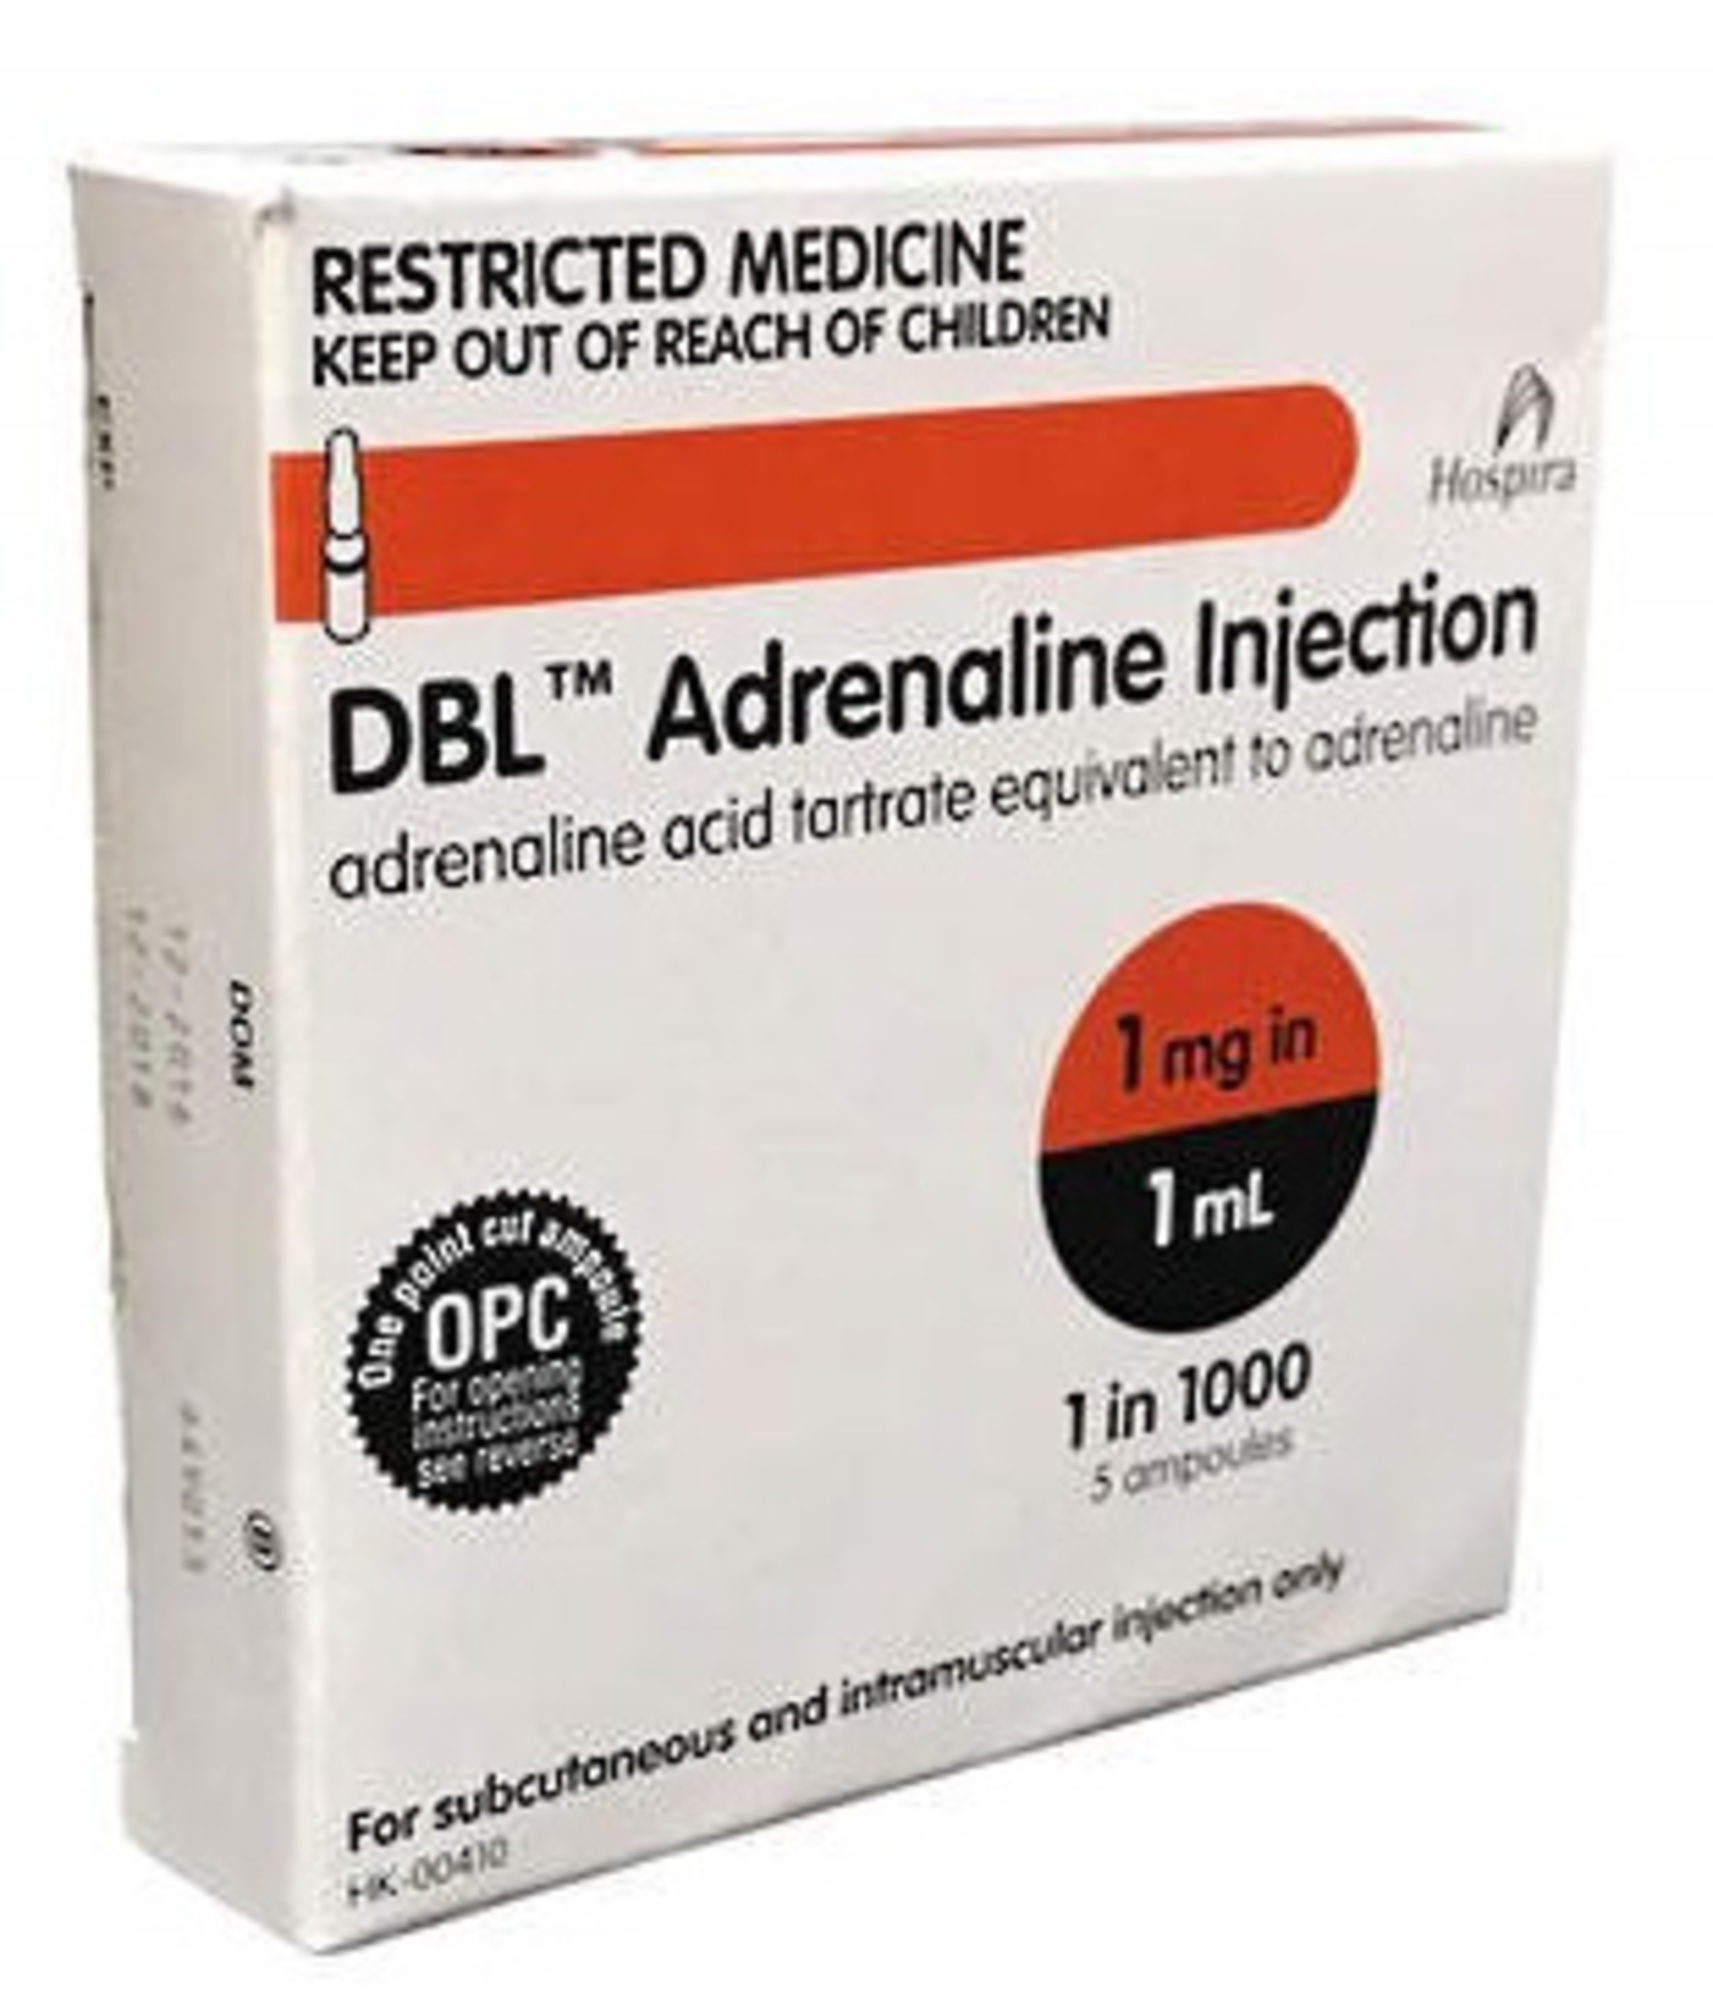 adrenaline injection